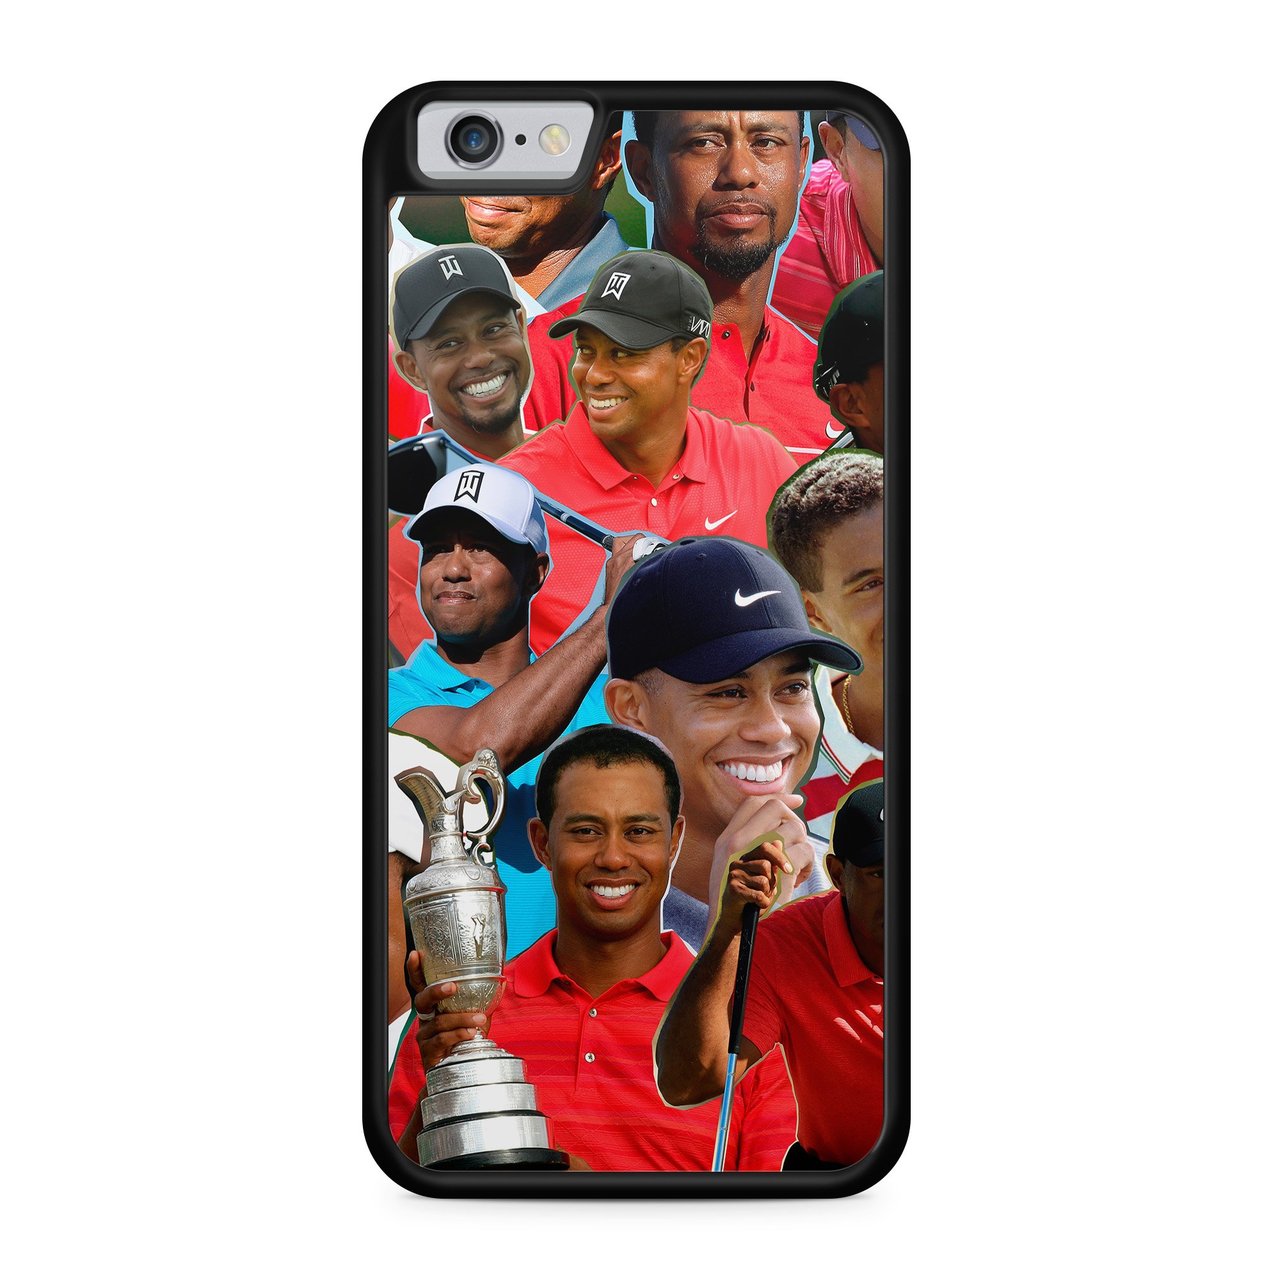 tiger woods iphone case